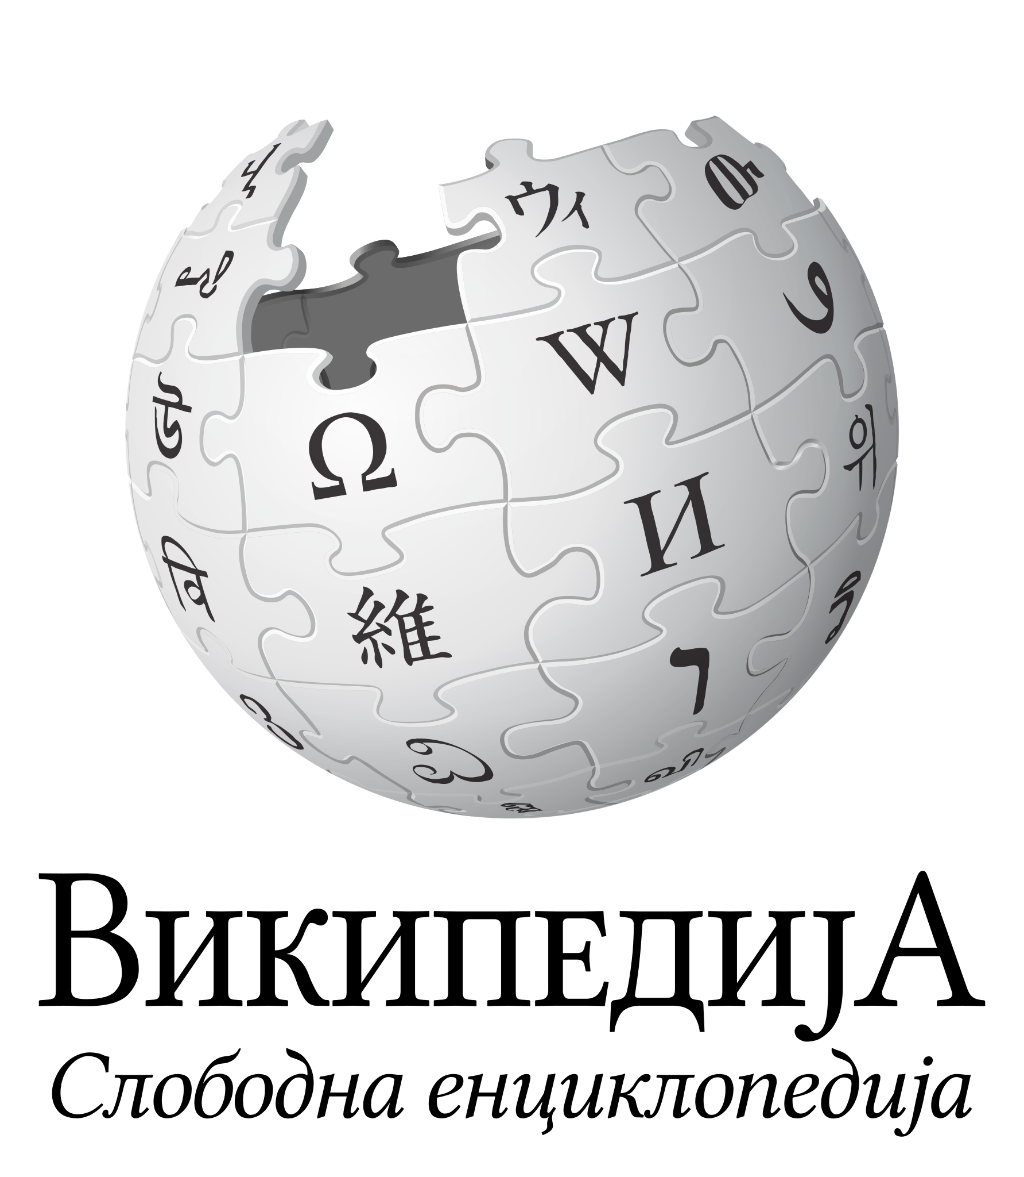 Wikipedia in Serbian Celebrating 20th Anniversary, Currently 21st in the World